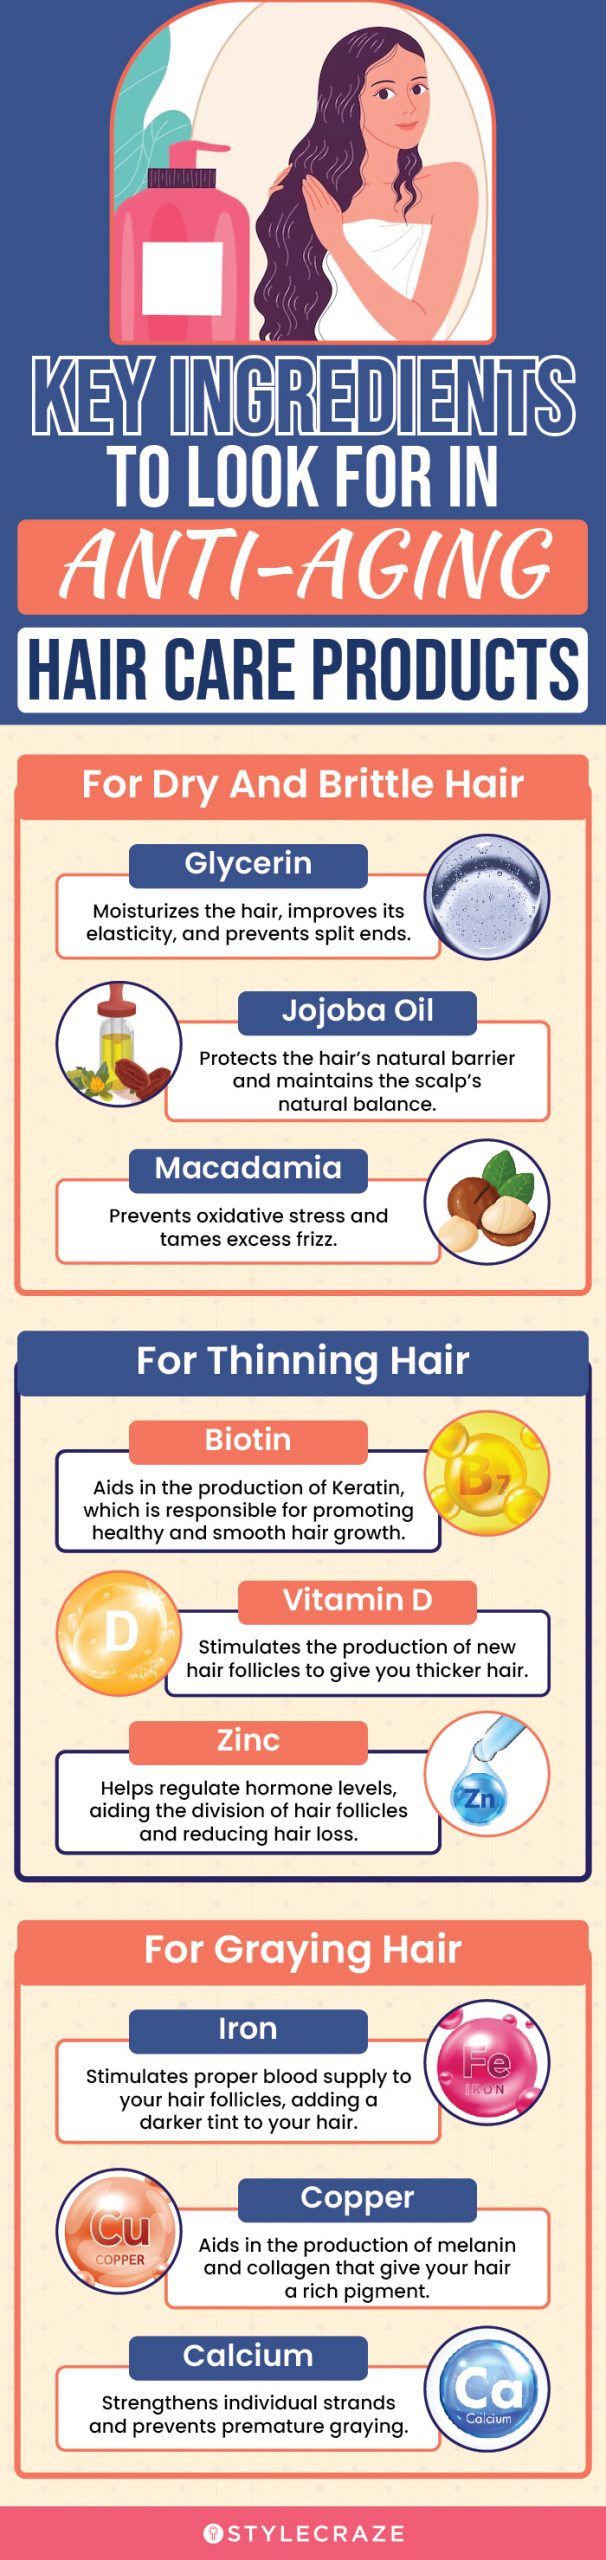 Key Ingredients To Look For In Anti-Aging Hair Care Products(infographic)